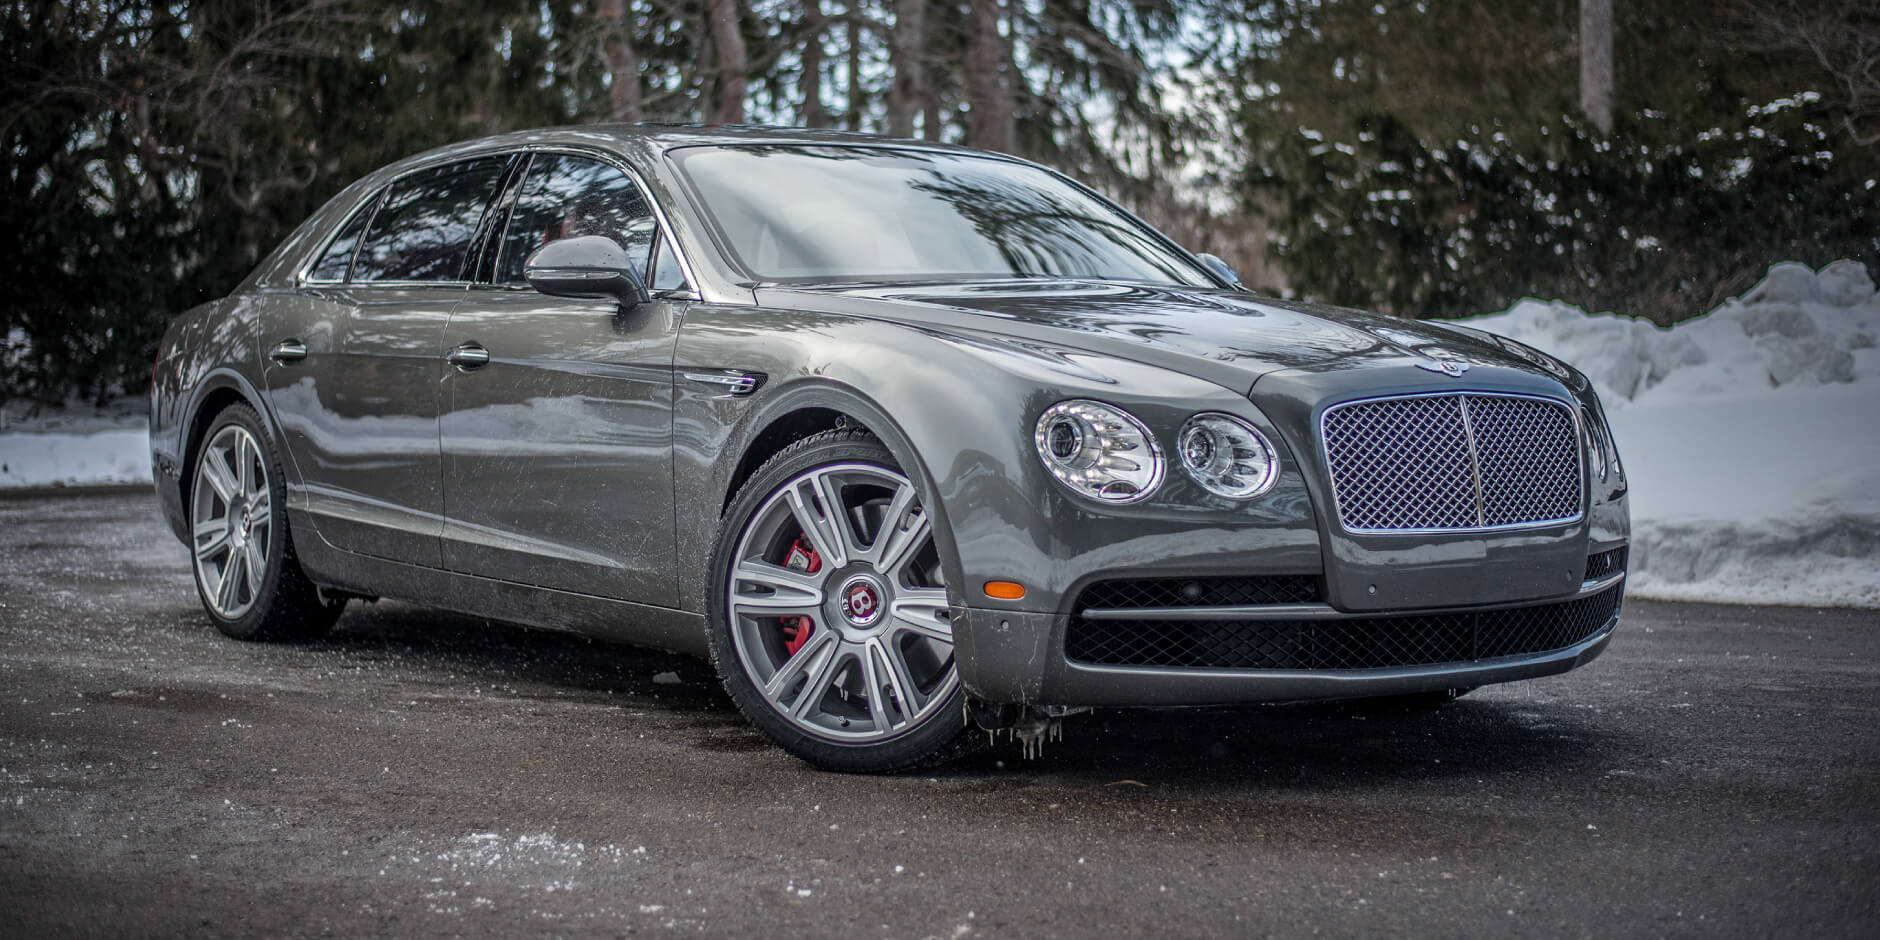 5 Top Routes in West Yorkshire for an Unforgettable Bentley Flying Spur Road Trip